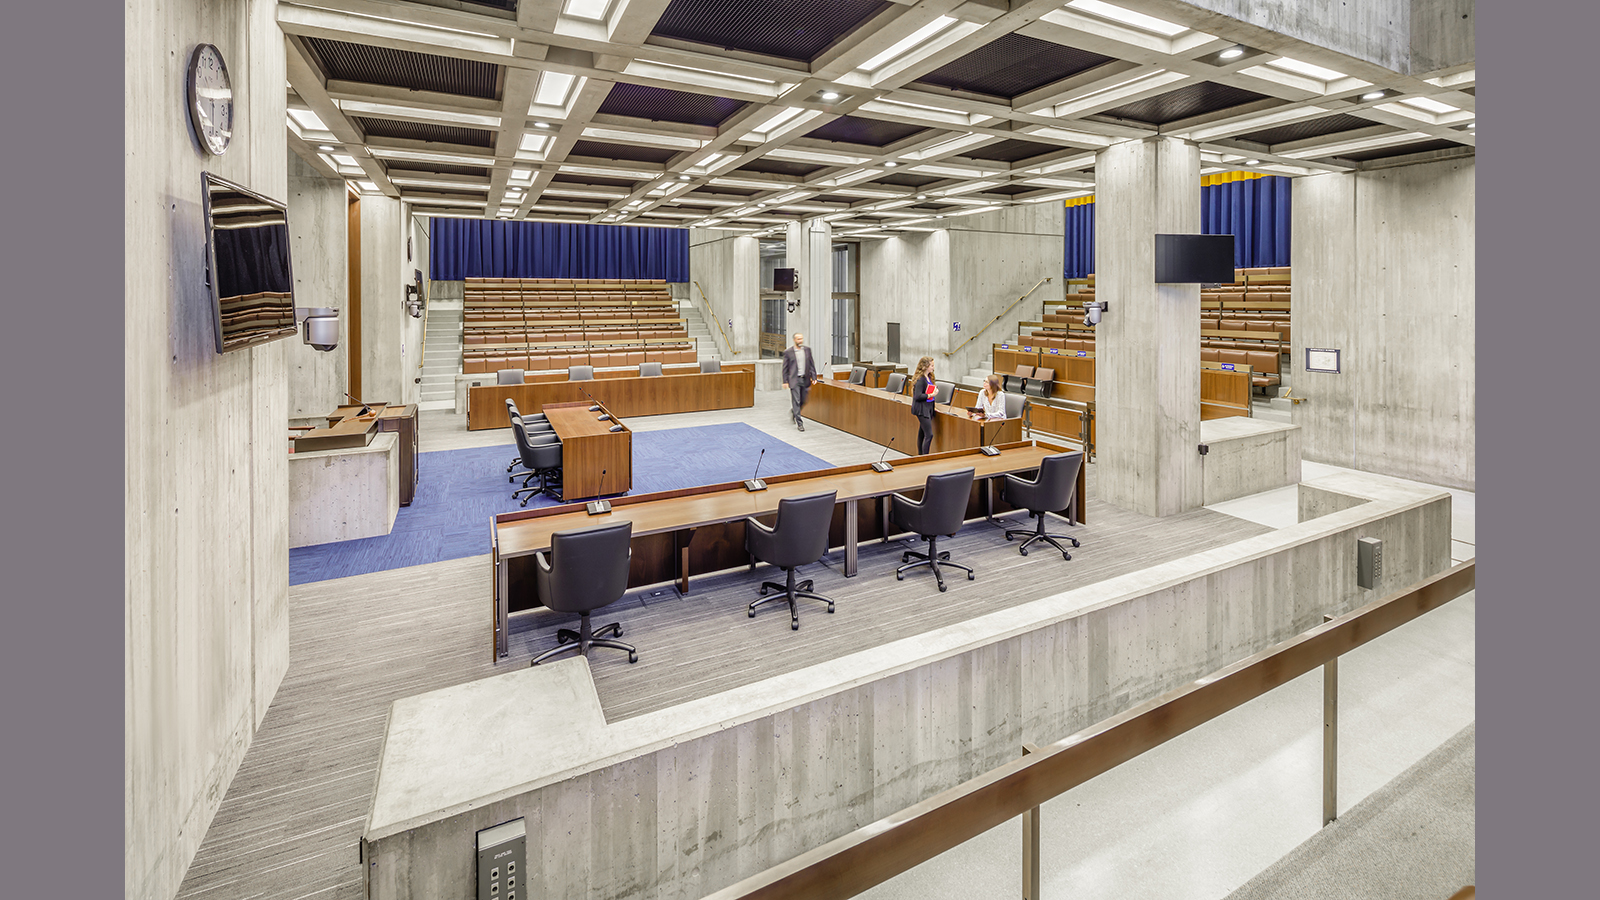 Boston City Hall Council Chamber, concrete pillars with TVs